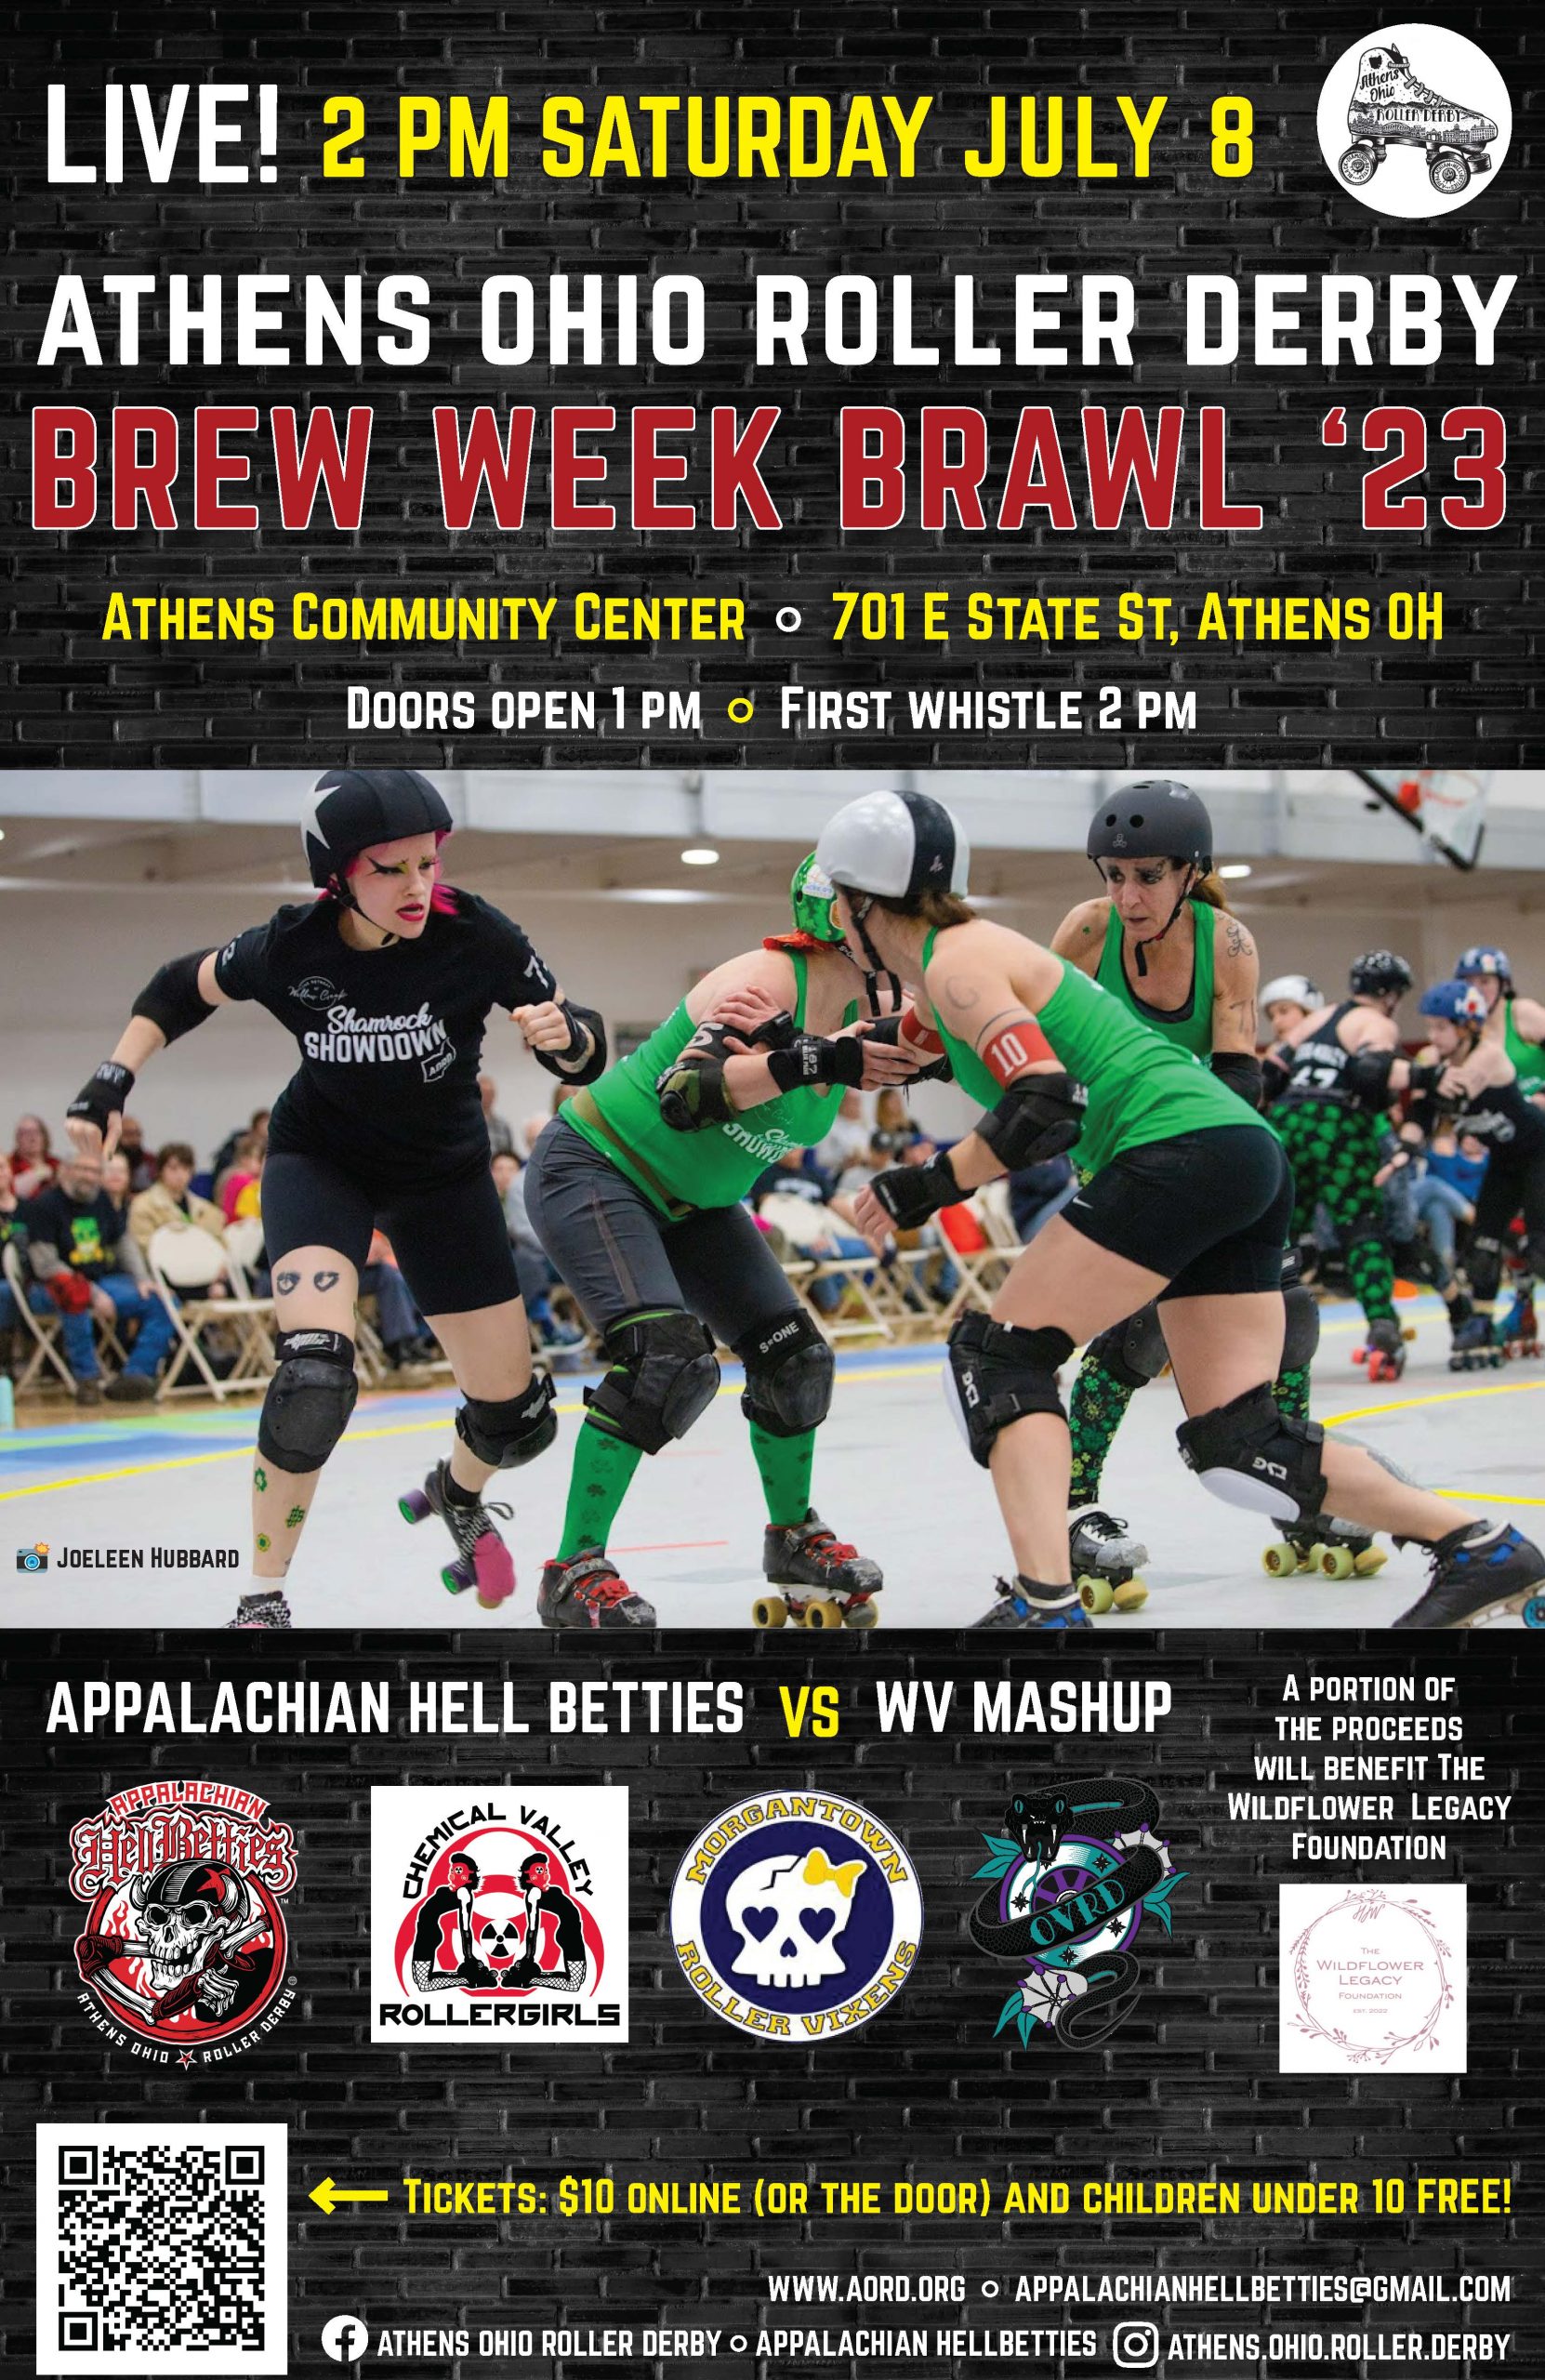 The flyer for the Athens Ohio Roller Derby Brew Week Brawl '23, featuring a picture of four roller derby players in full gear playing the game. All the information in the flyer is detailed in the posting.